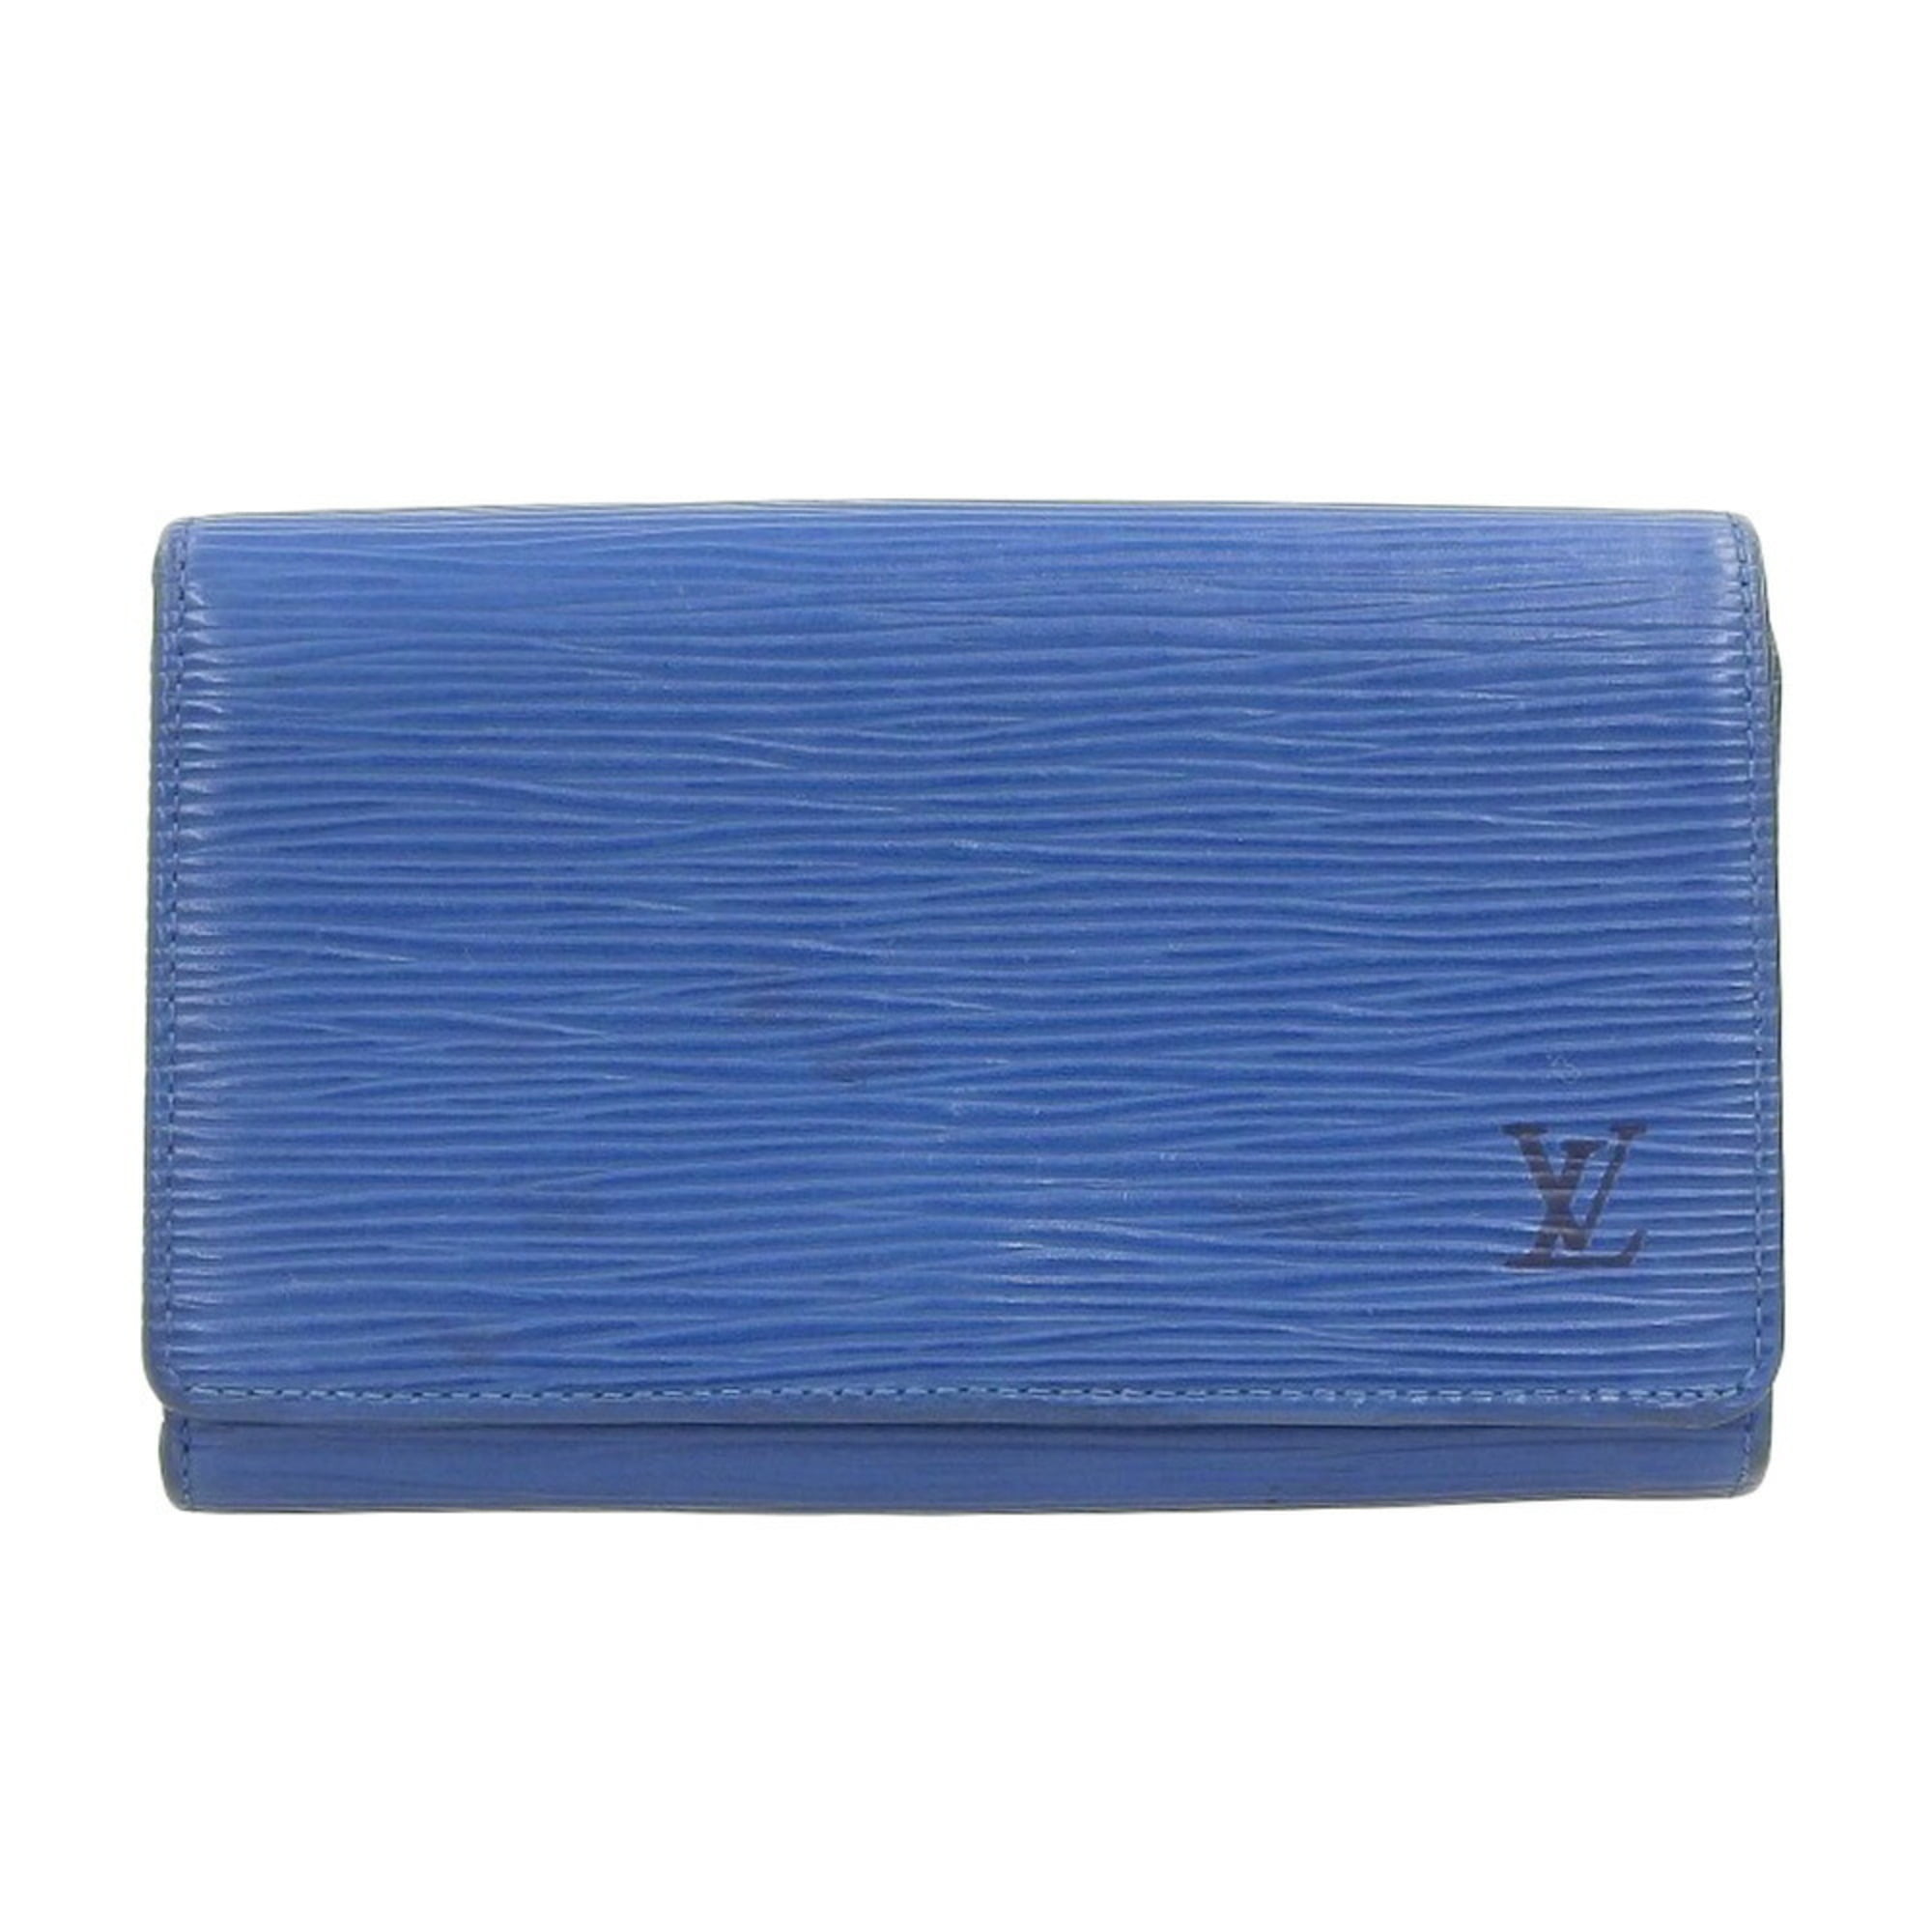 Buy [Used] LOUIS VUITTON PORTOMONE VIE TRESOR Bi-Fold Compact Wallet  Monogram M61730 from Japan - Buy authentic Plus exclusive items from Japan